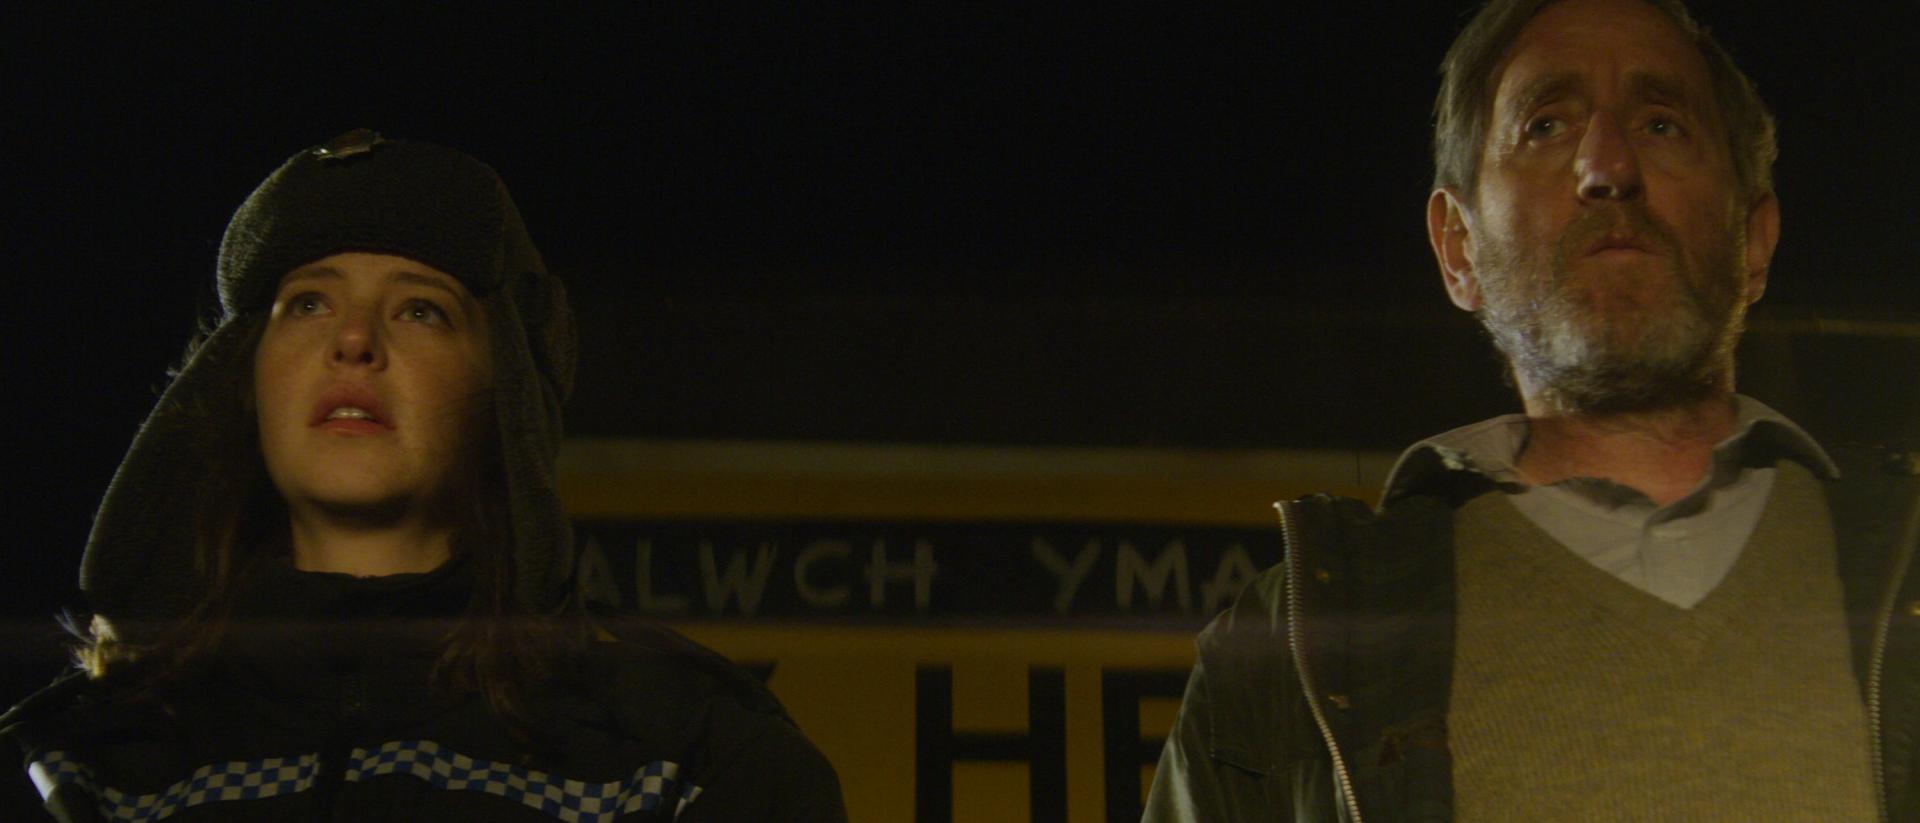 Annes Elwy and Michael Smiley in The Toll